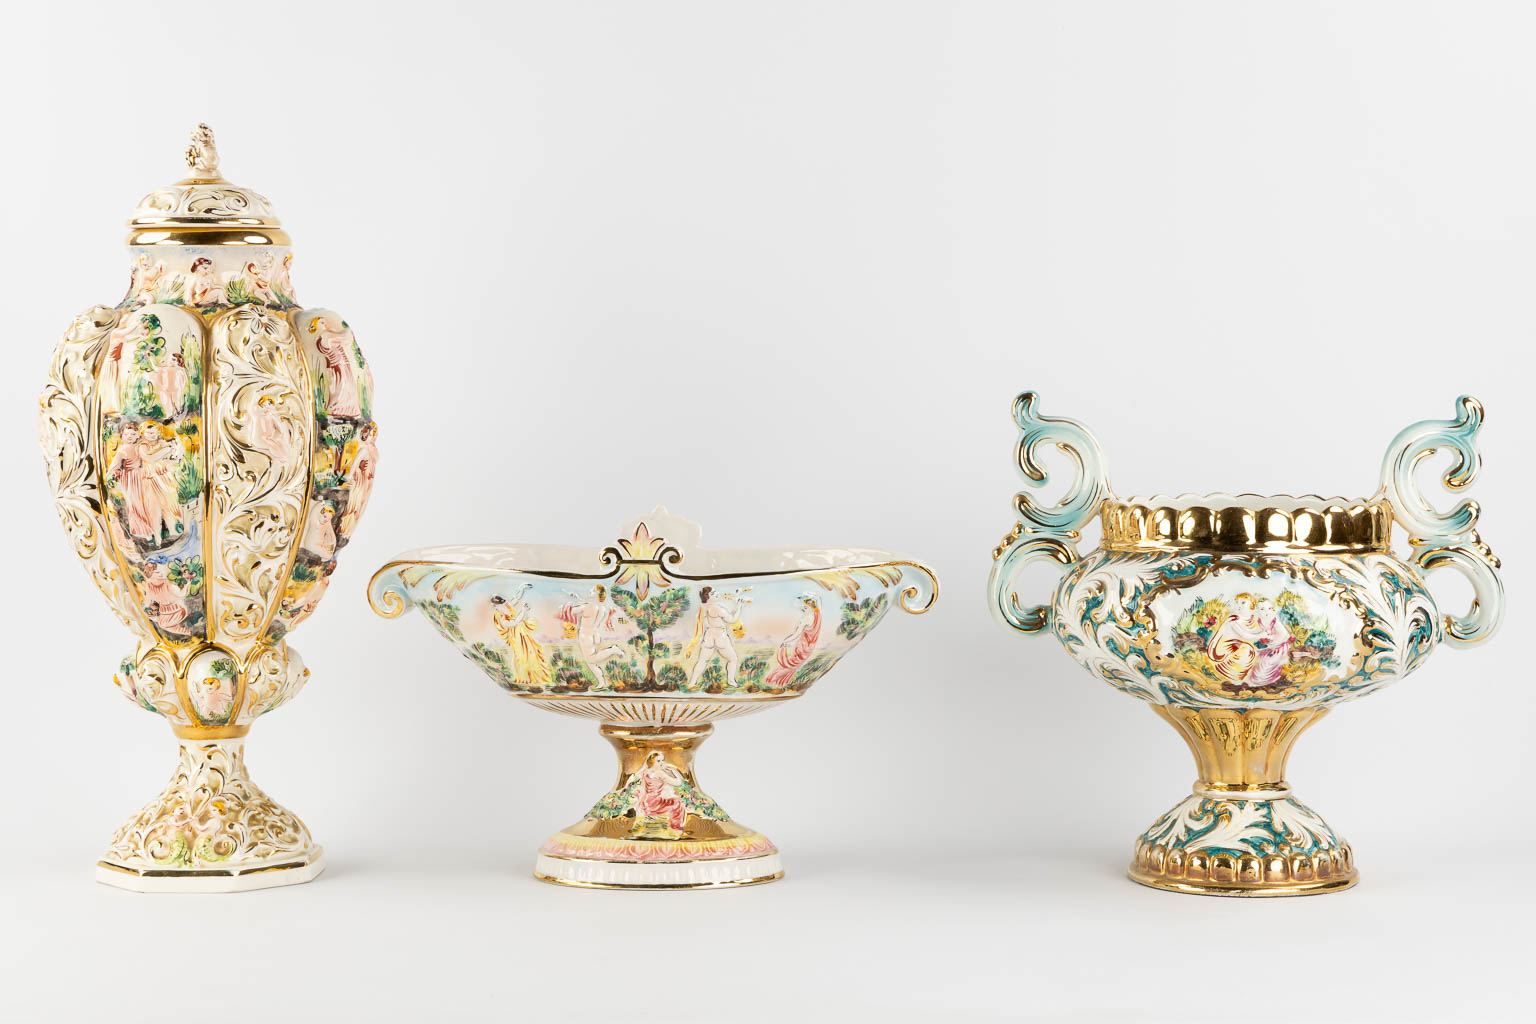 Six large bowls and vases, glazed faience, Capodimonte, Italy. (H:52 x D:23 cm) - Image 4 of 16